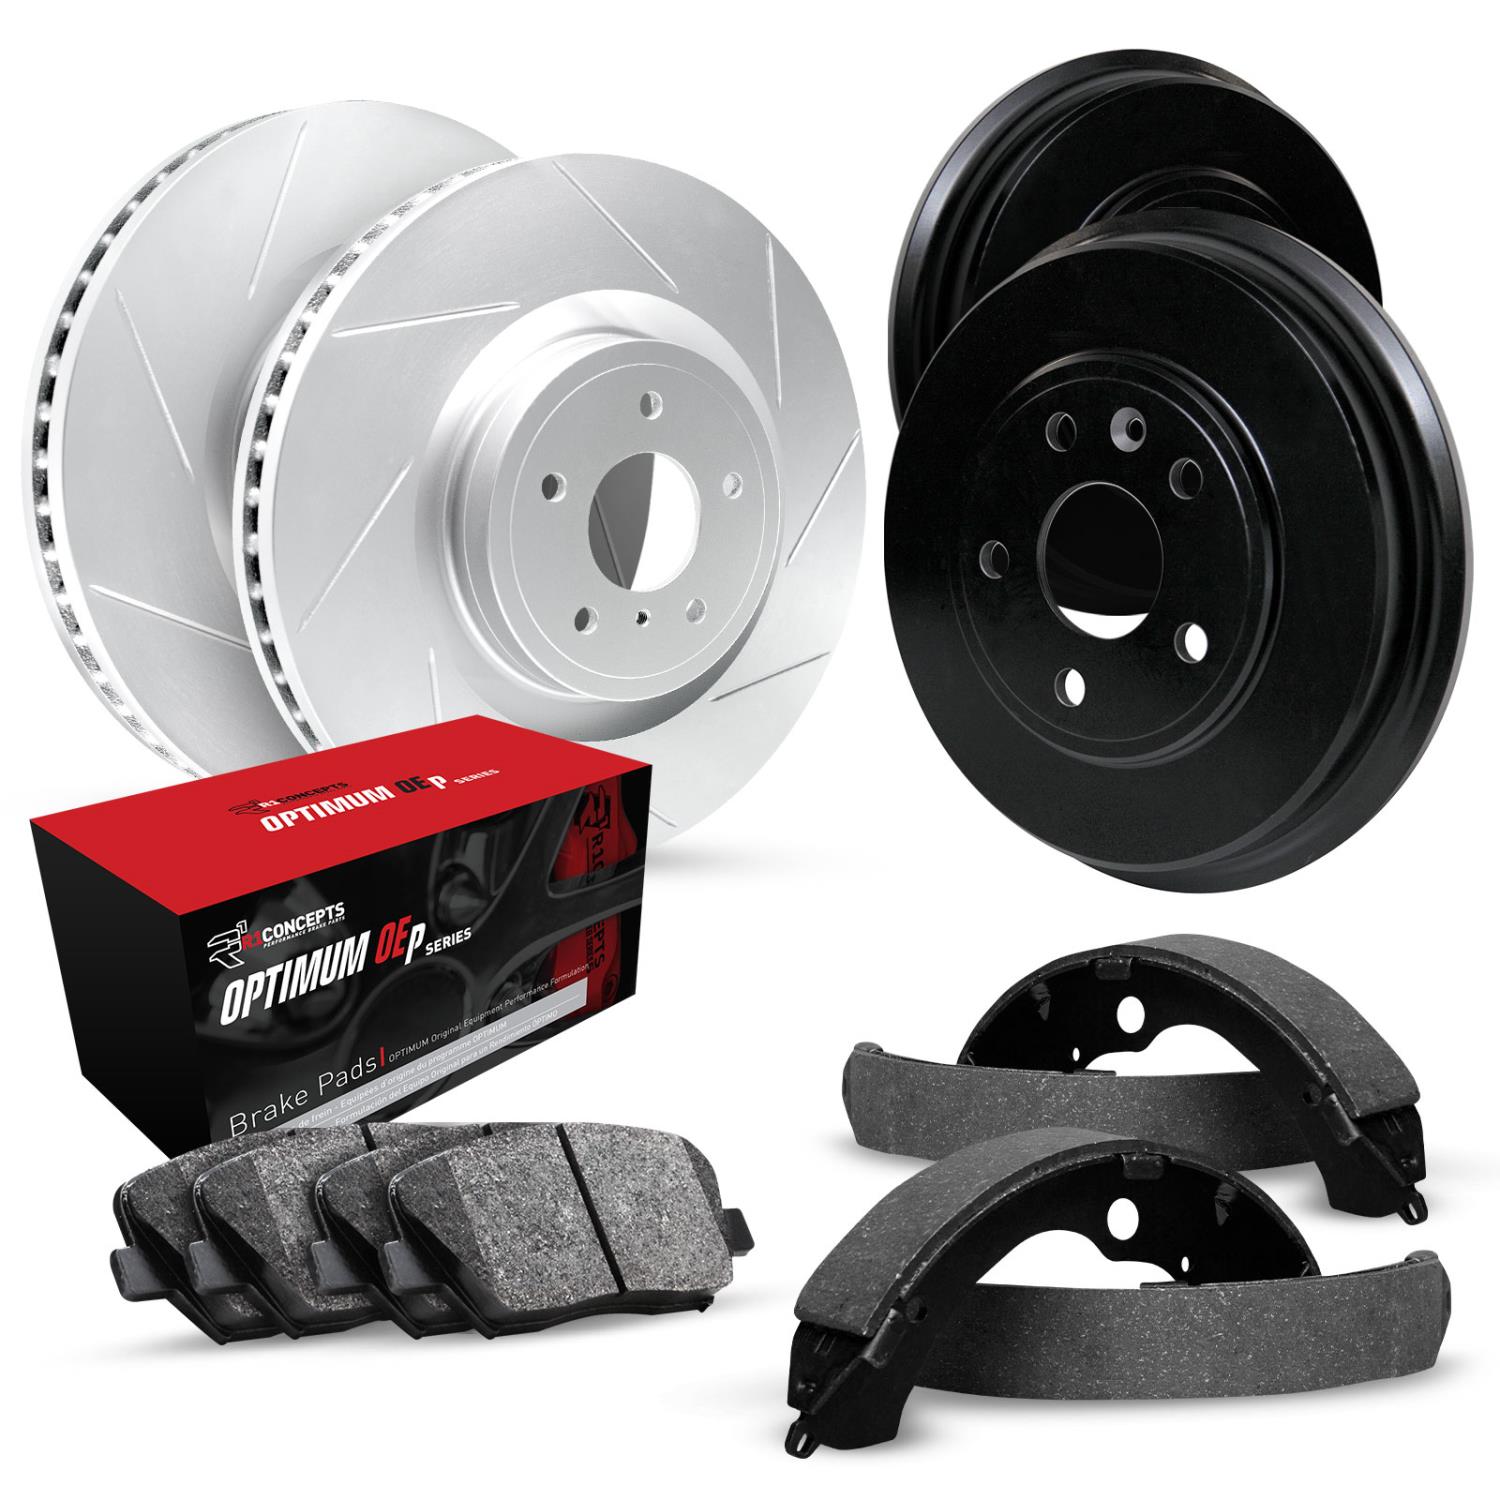 GEO-Carbon Slotted Brake Rotor & Drum Set w/Optimum OE Pads & Shoes, 1973-1976 Ford/Lincoln/Mercury/Mazda